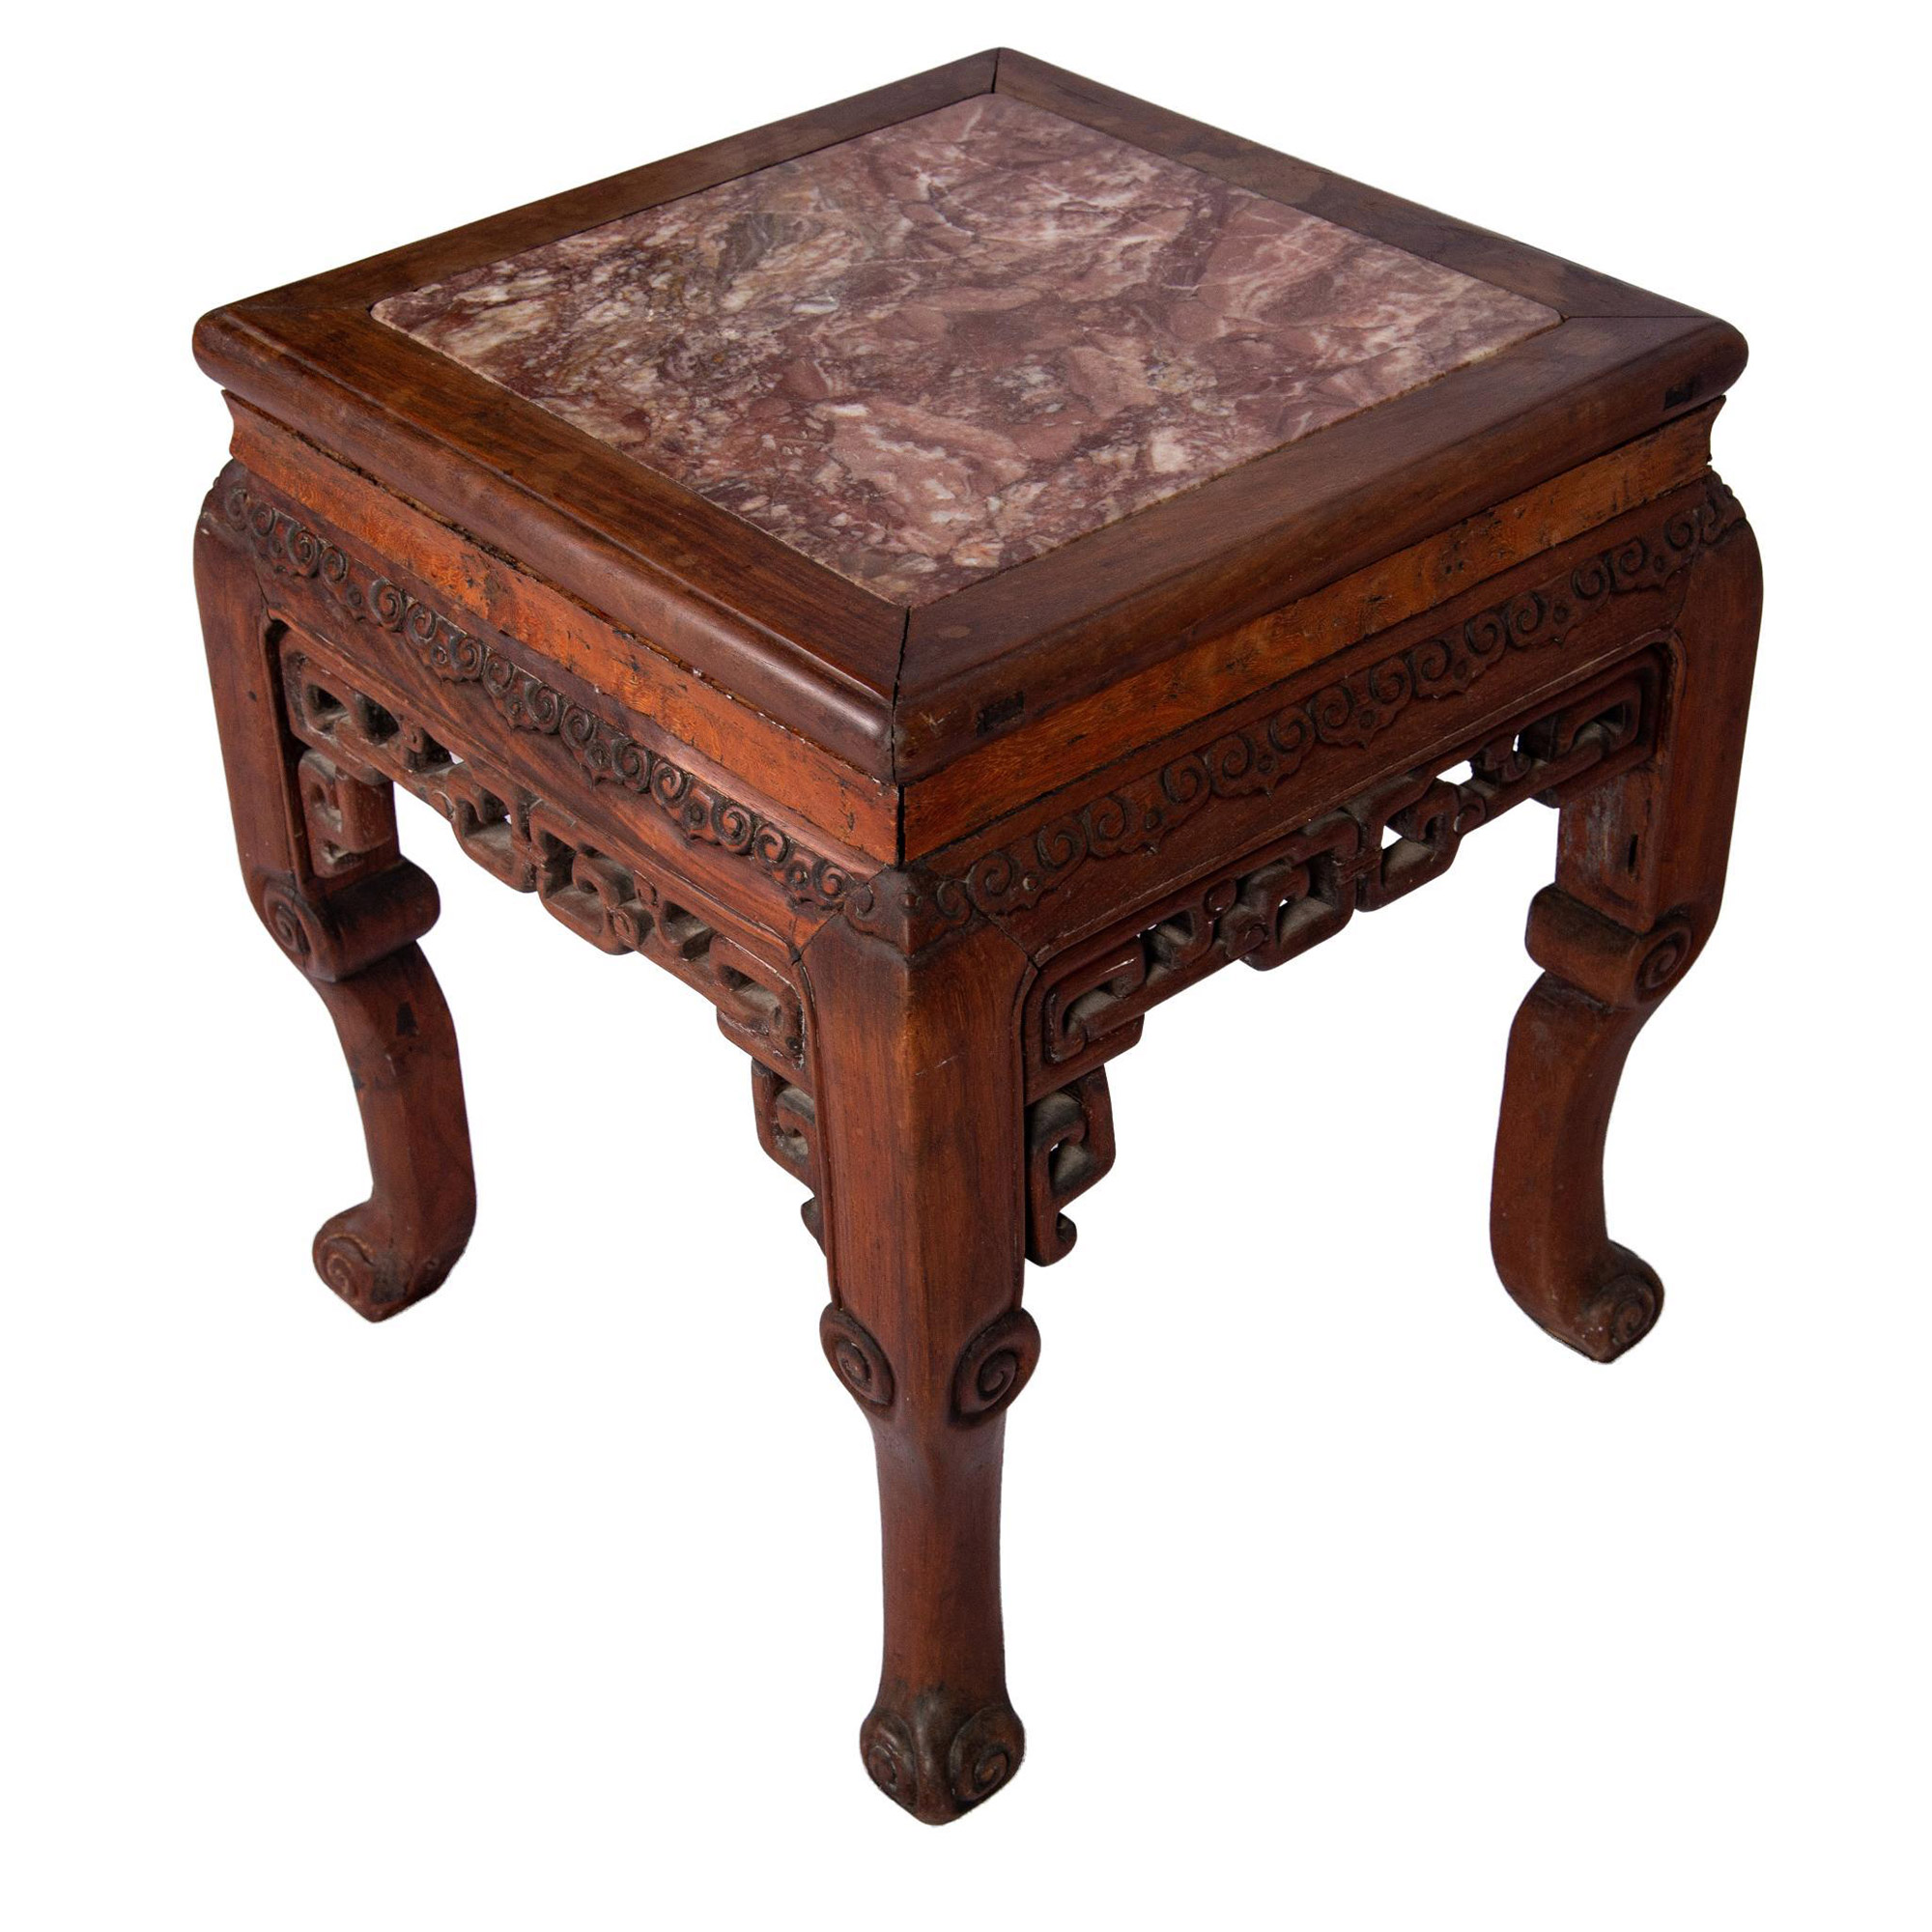 Antique Chinese Side Table in Ebonized Wood with Marble Top - Image 3 of 3